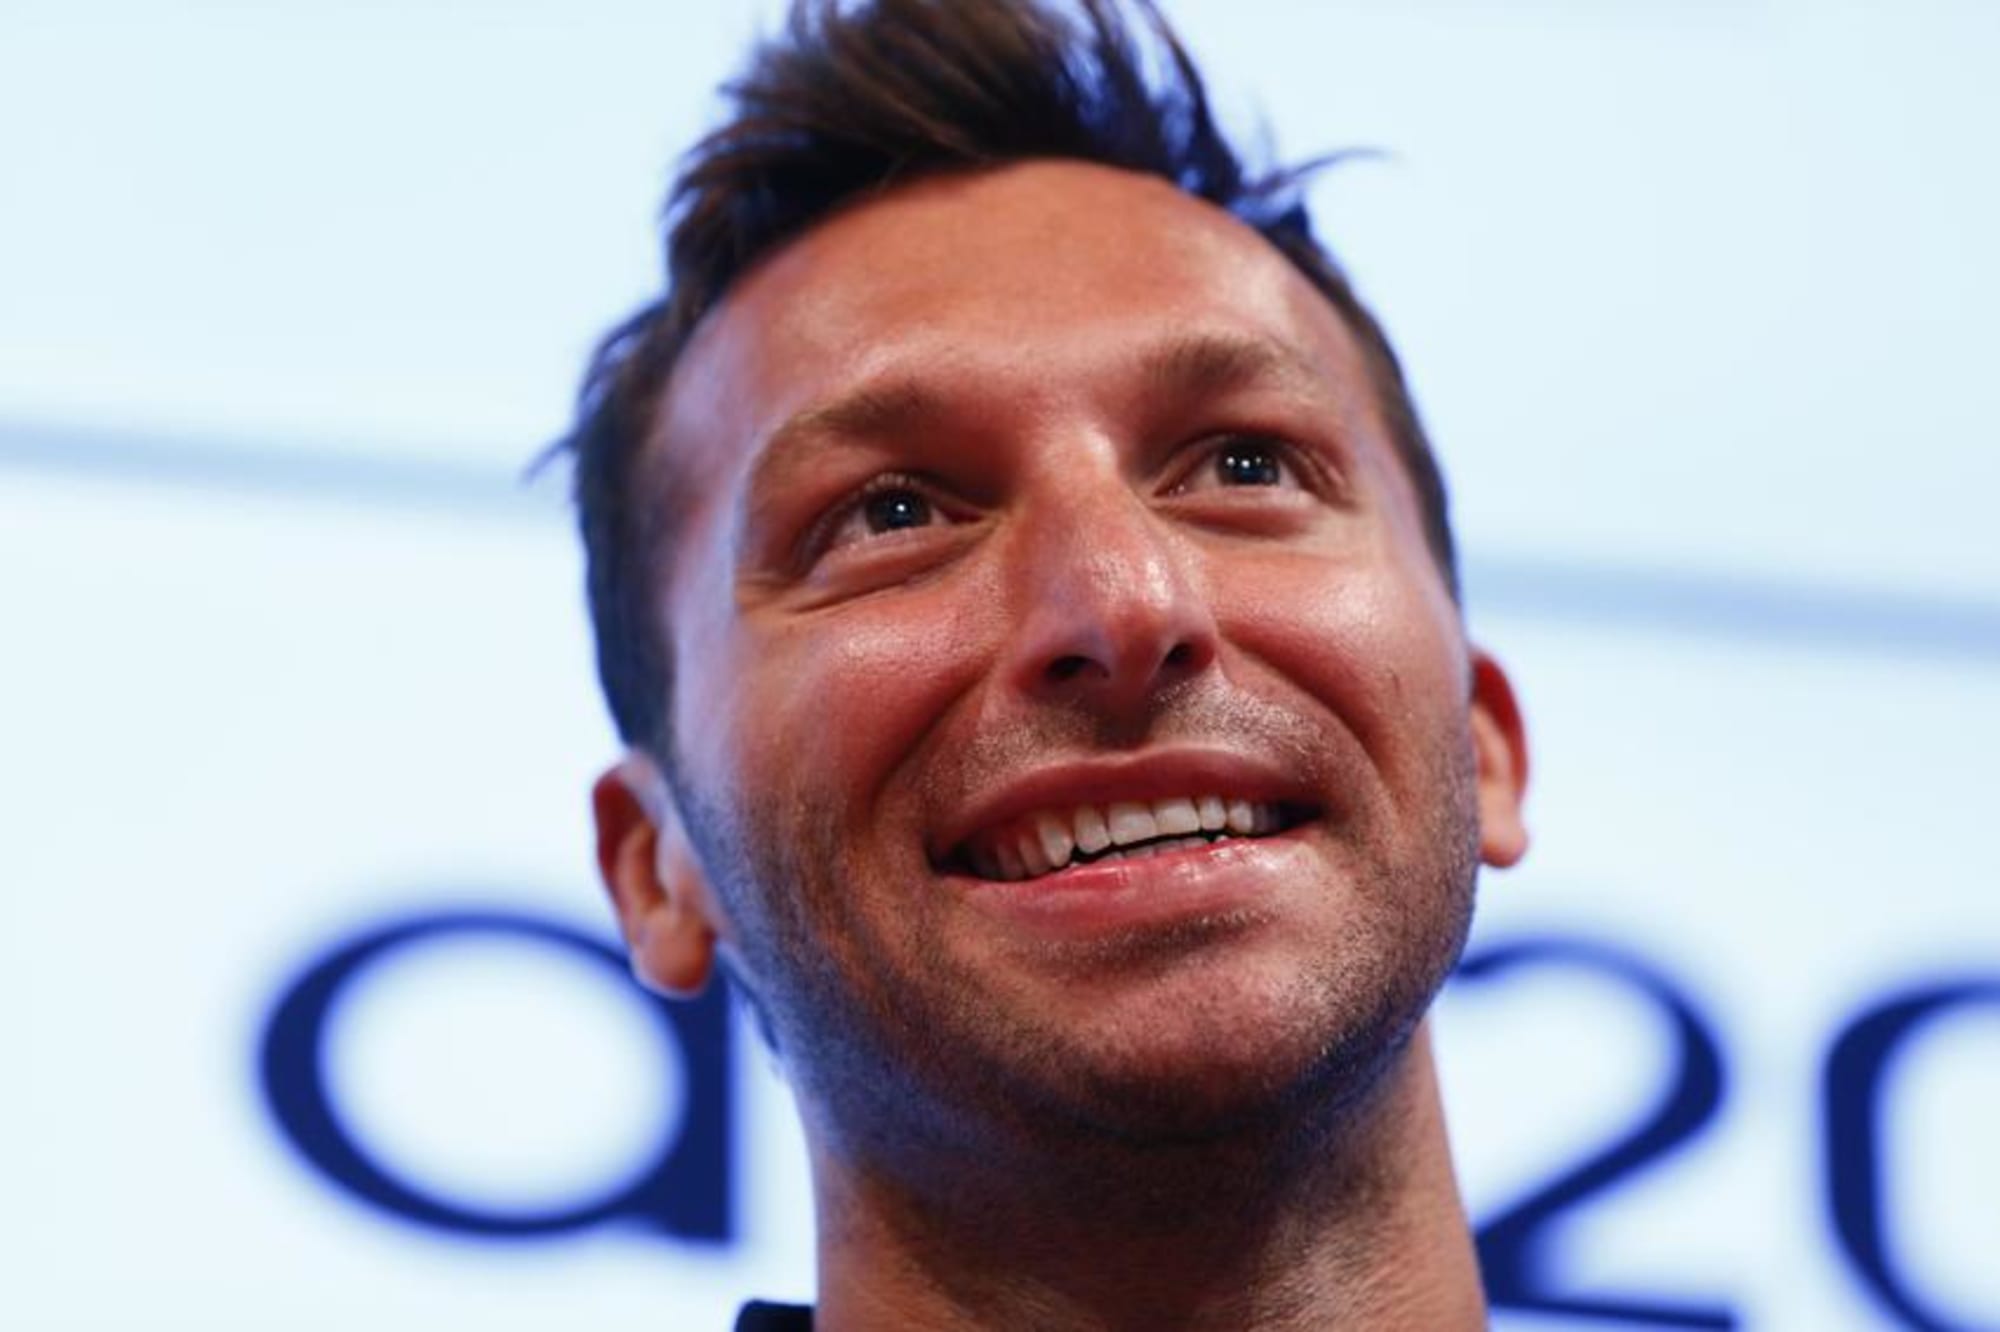 Olympic champion swimmer Ian Thorpe hospitalized, competitive career over